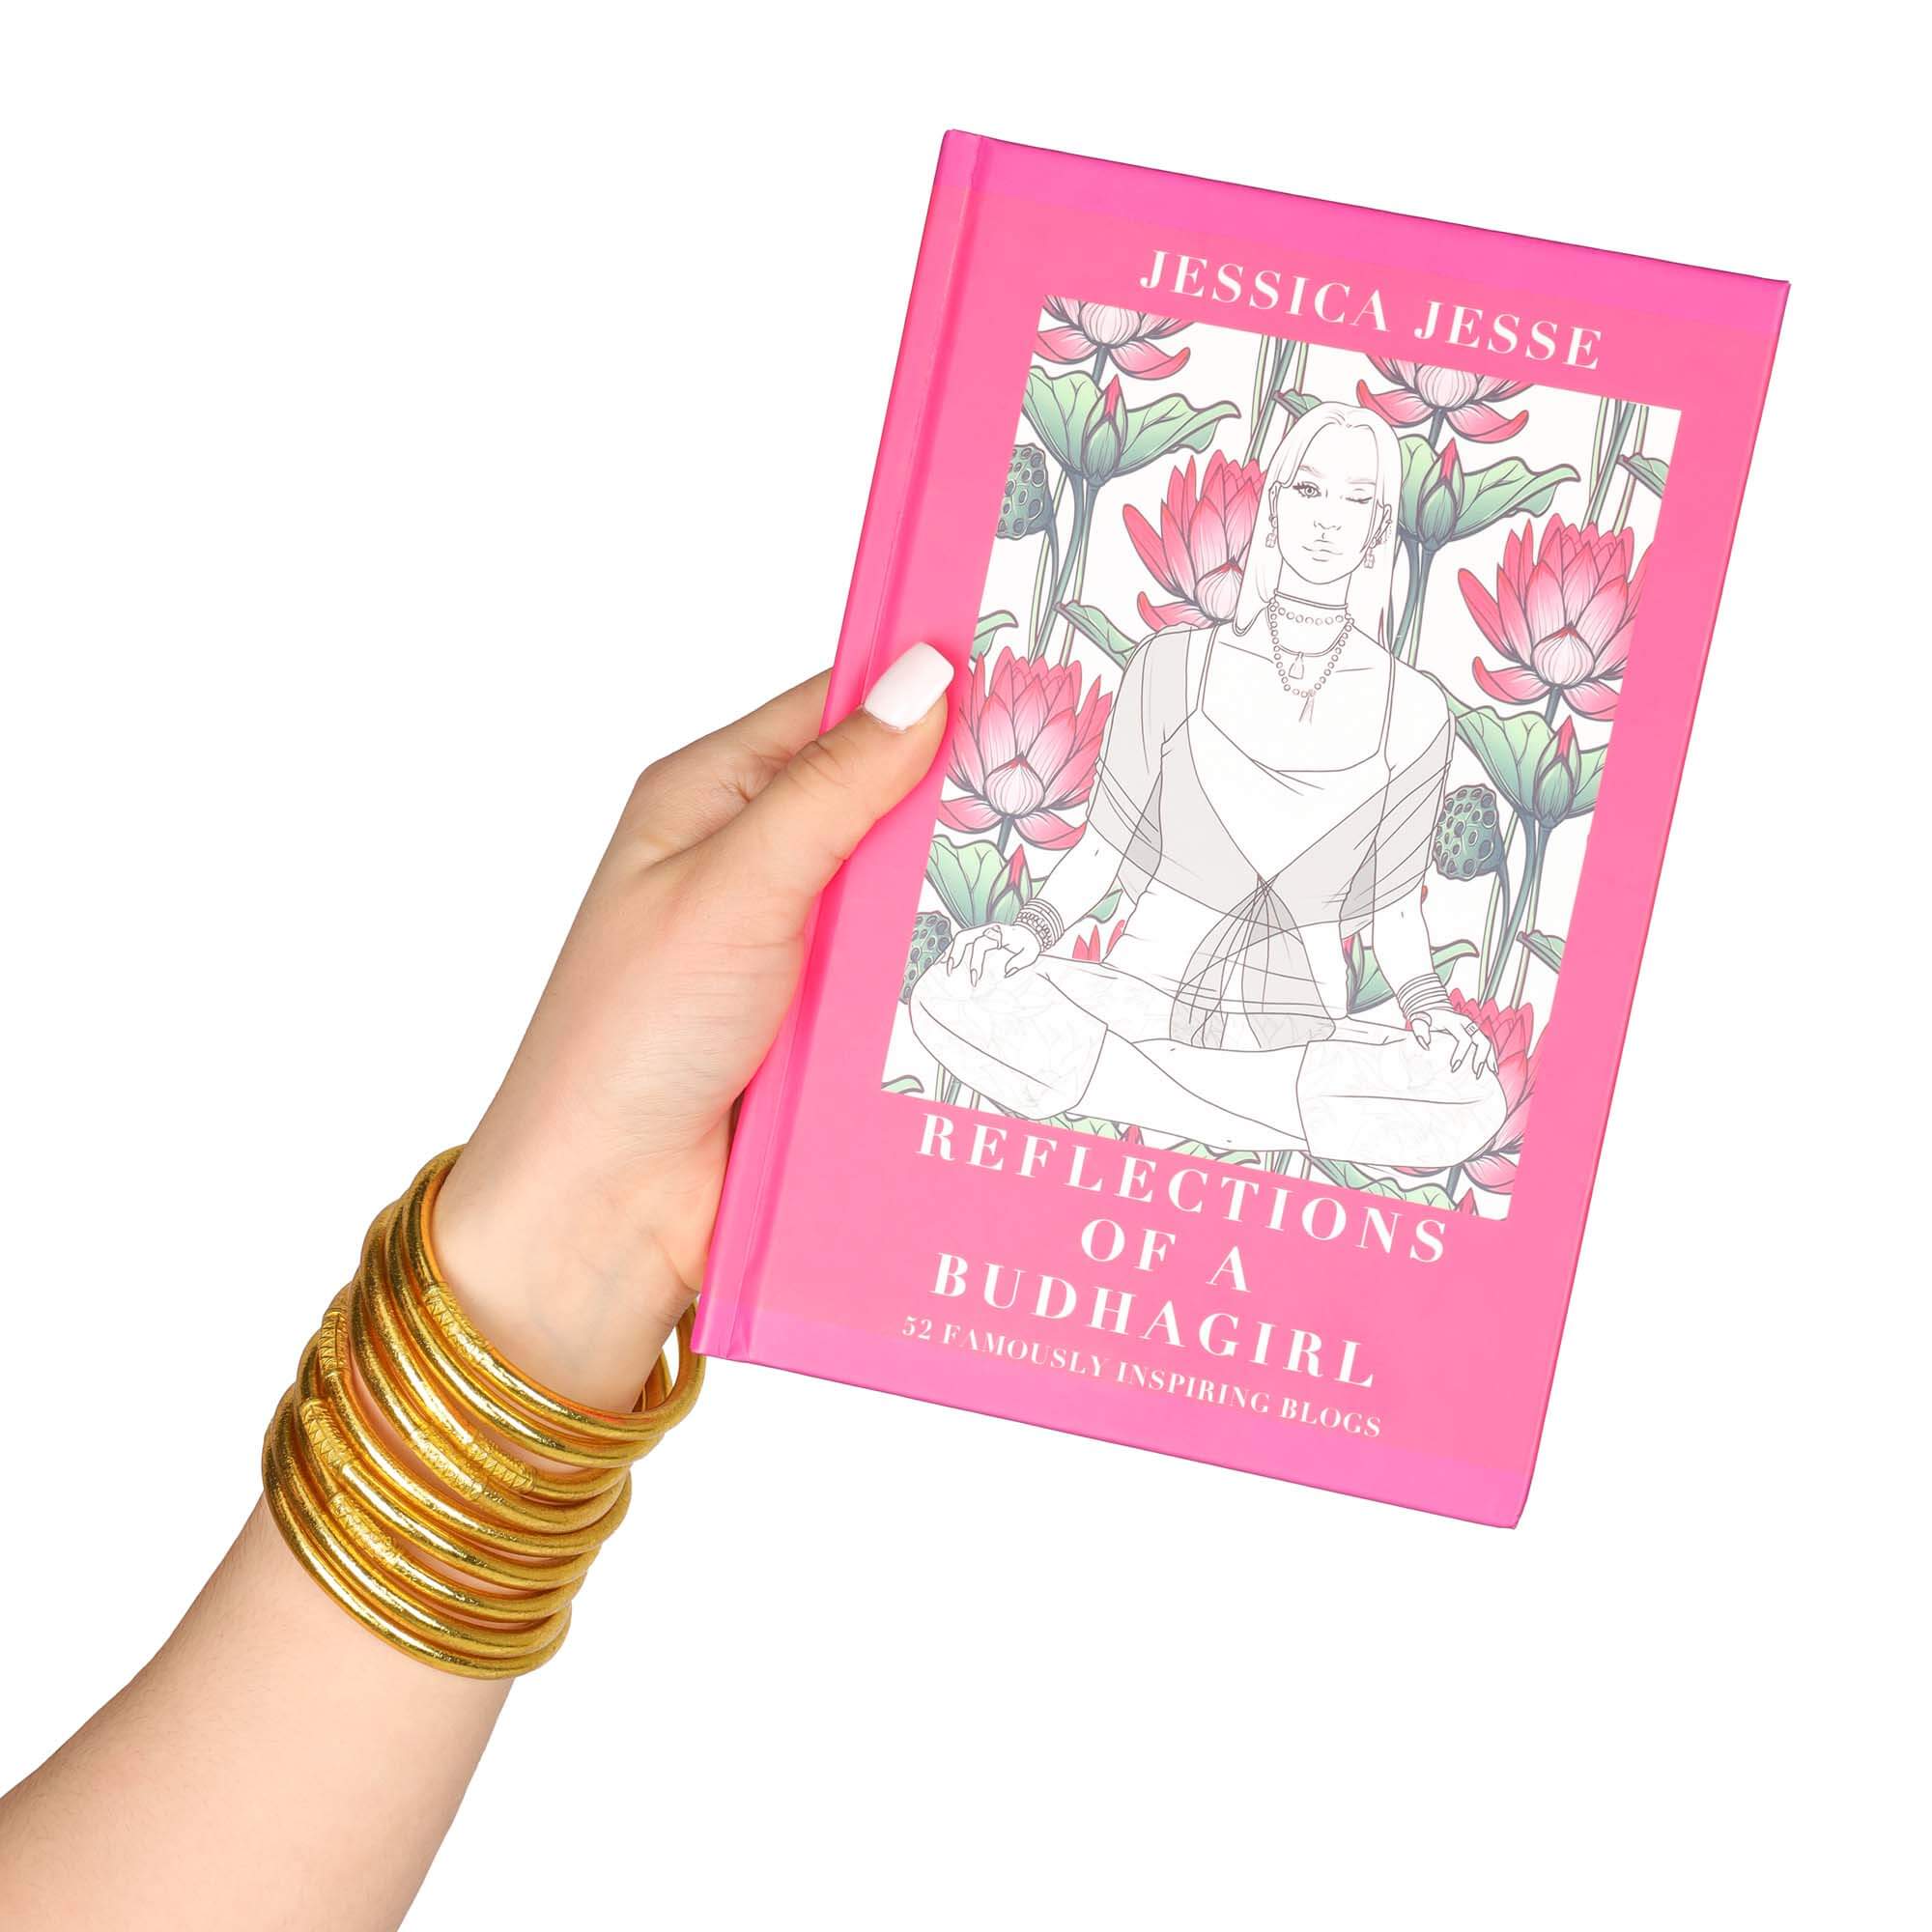 Book | Reflections of a BuDhaGirl by Jessica Jesse Front Cover | BuDhaGirl